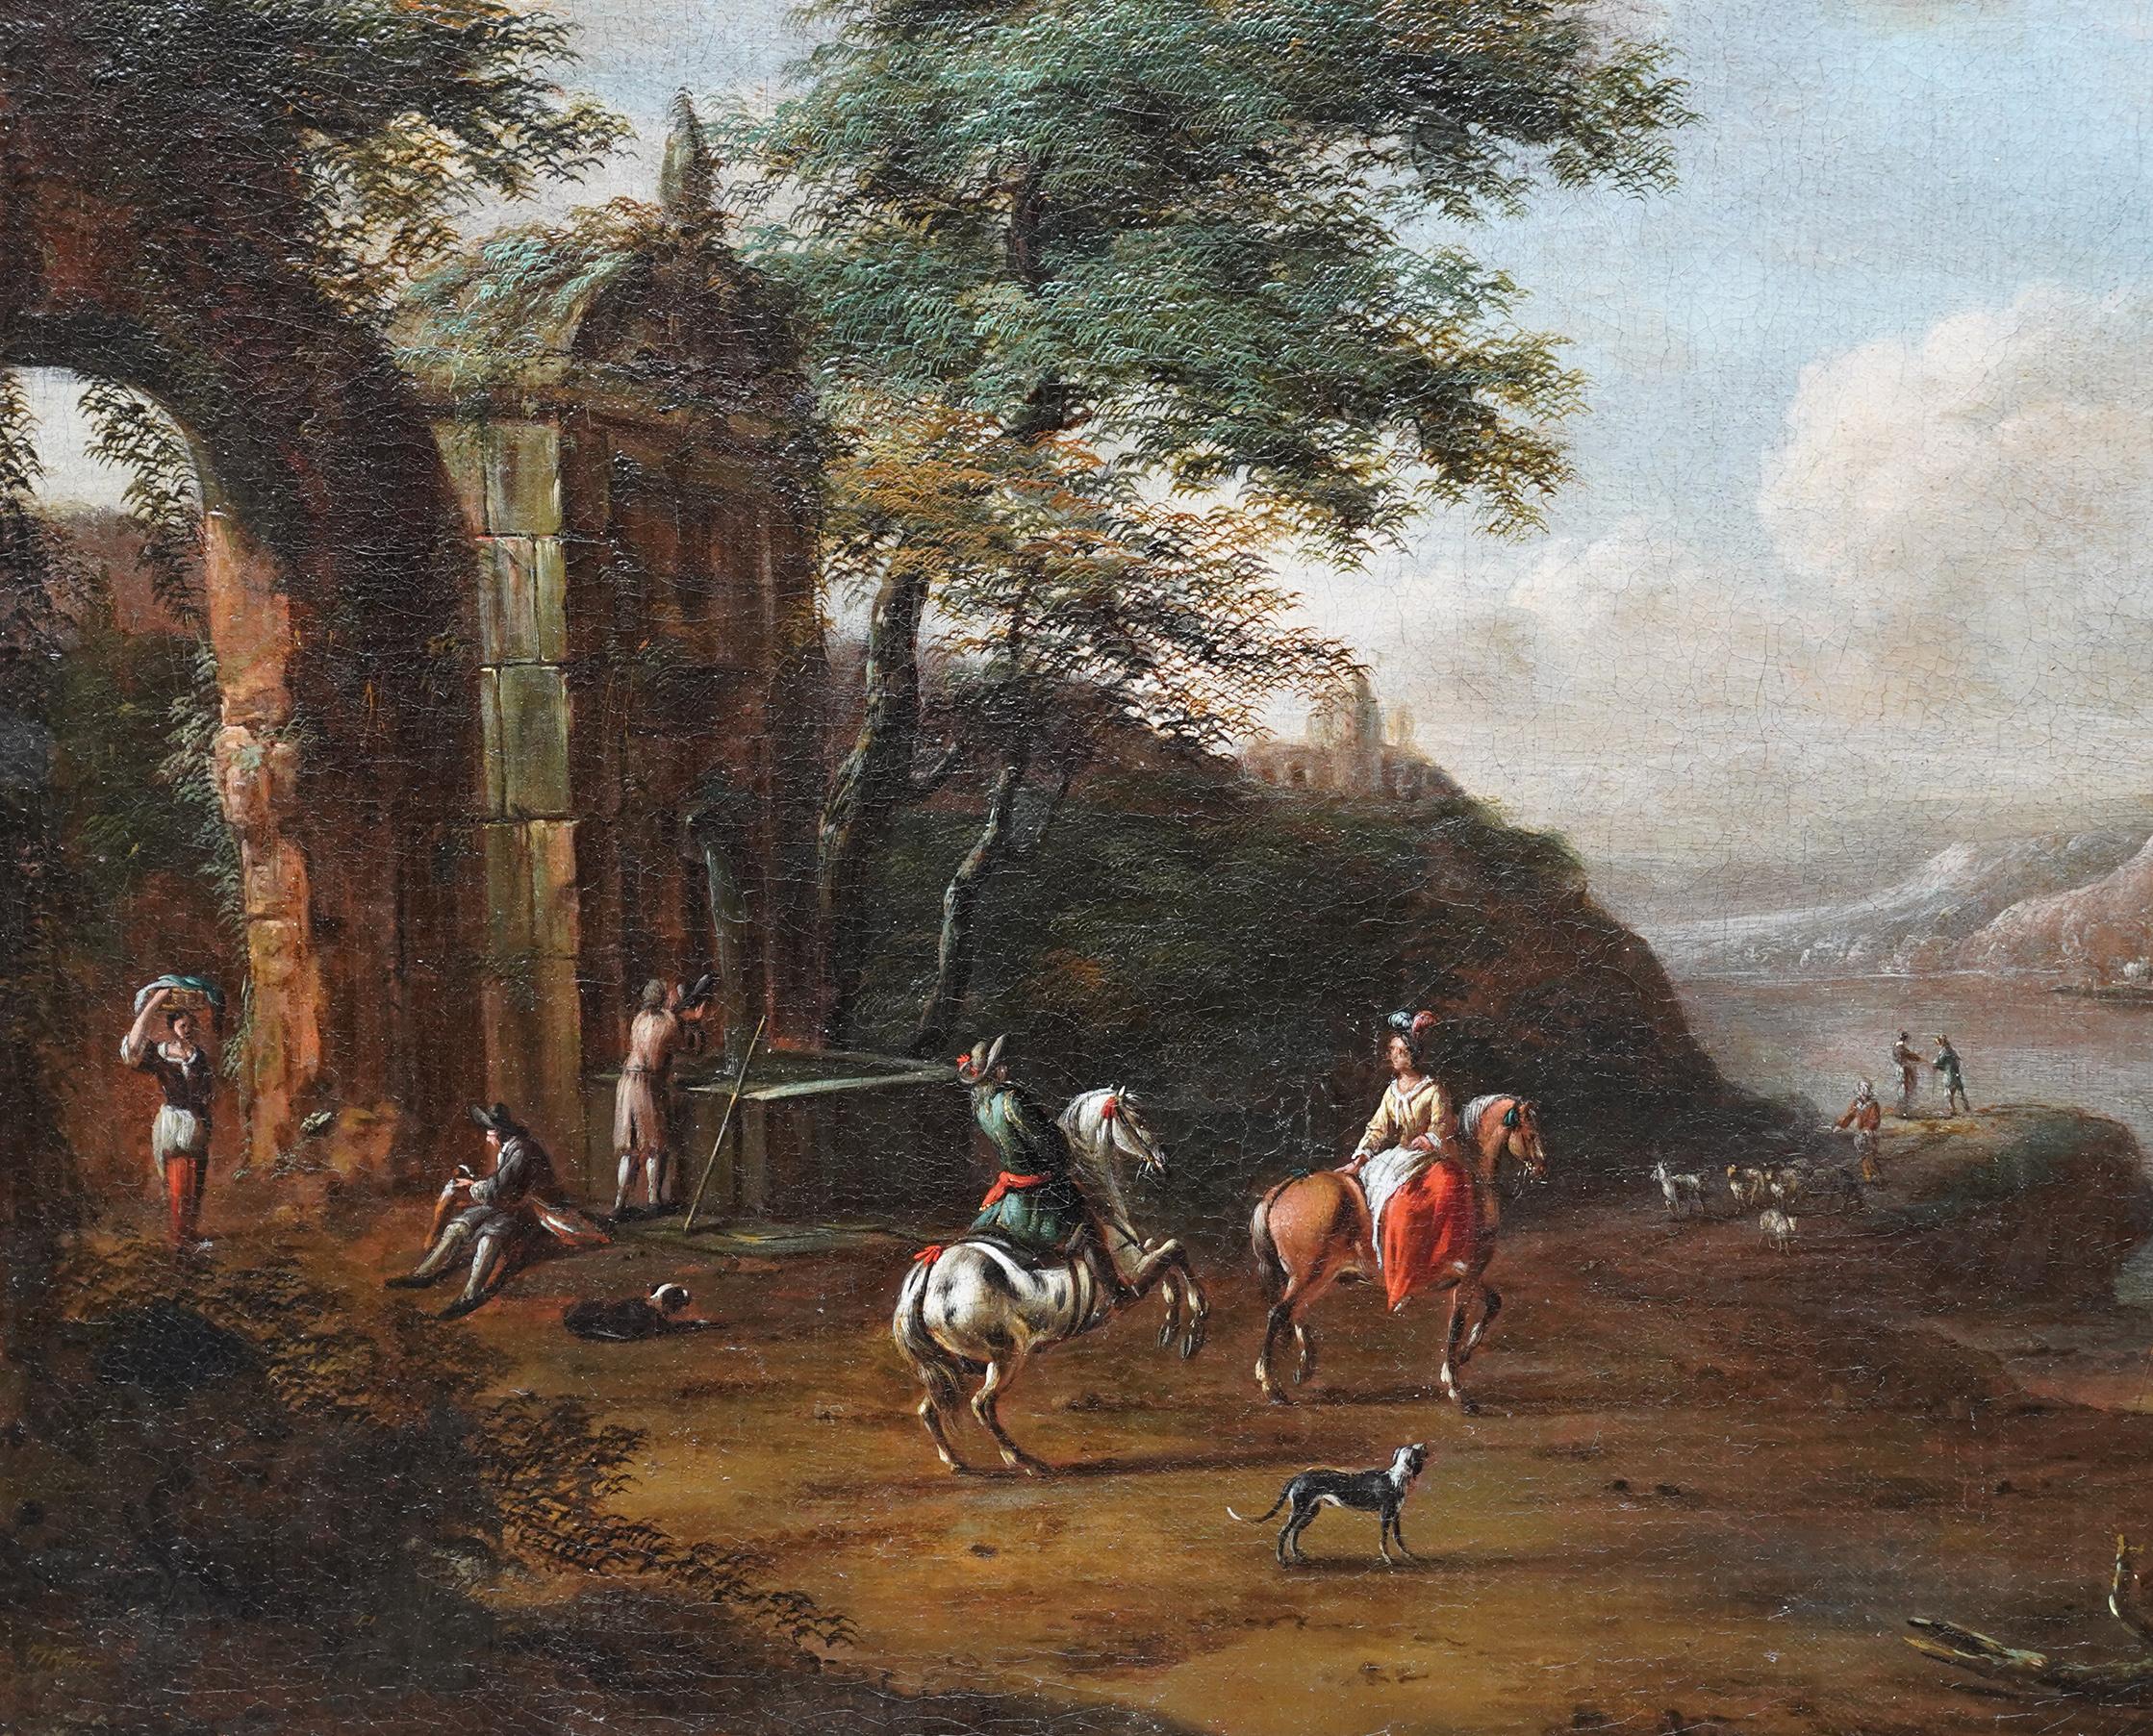 Travellers near Ruins in a Landscape - Dutch Old Master art figural oil painting - Old Masters Painting by Pieter Wouwerman